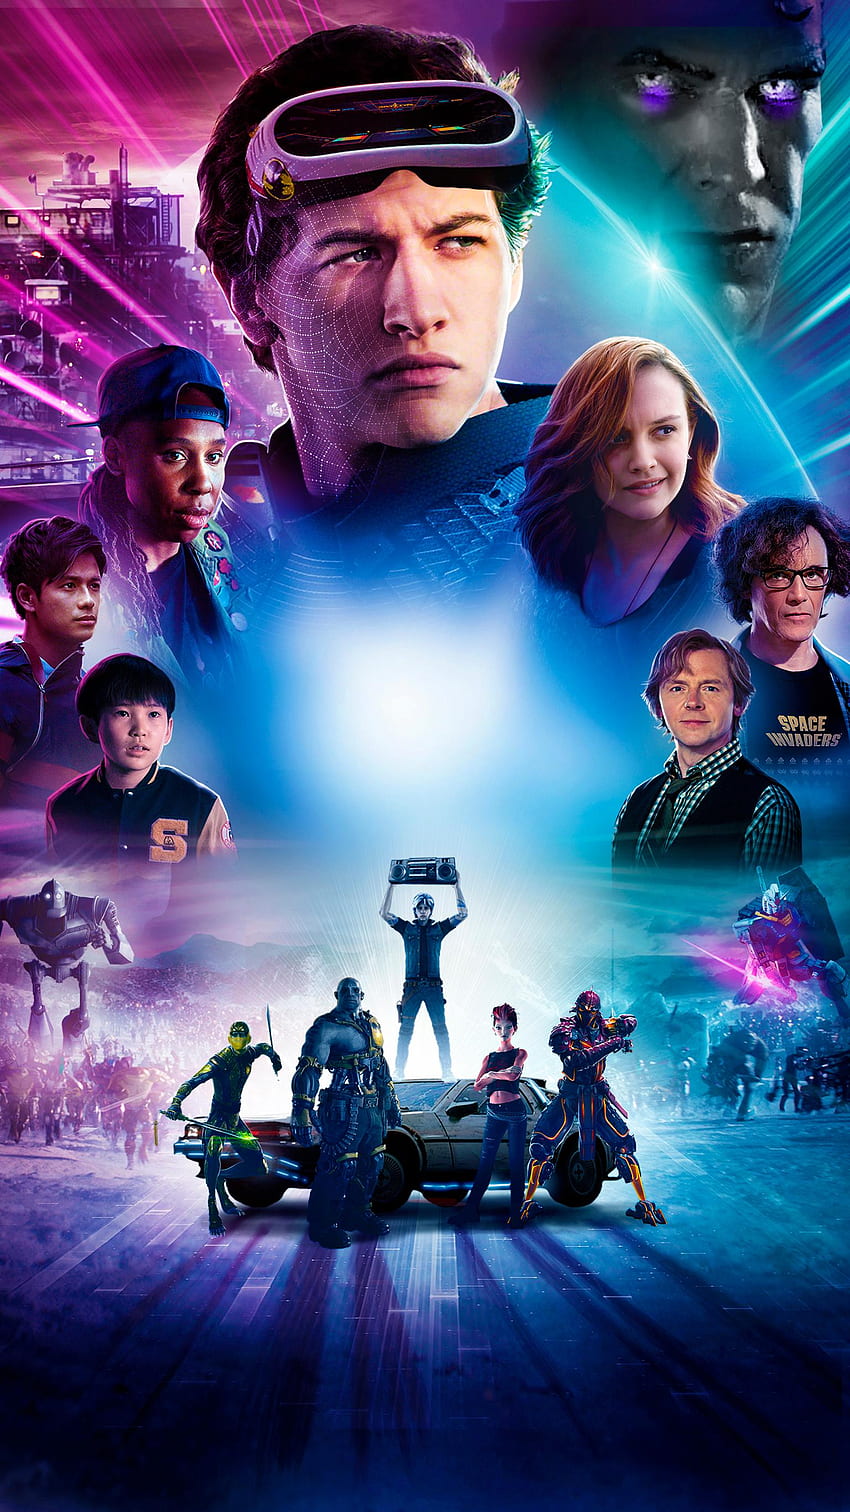 Ready Player One (2022) movie HD phone wallpaper